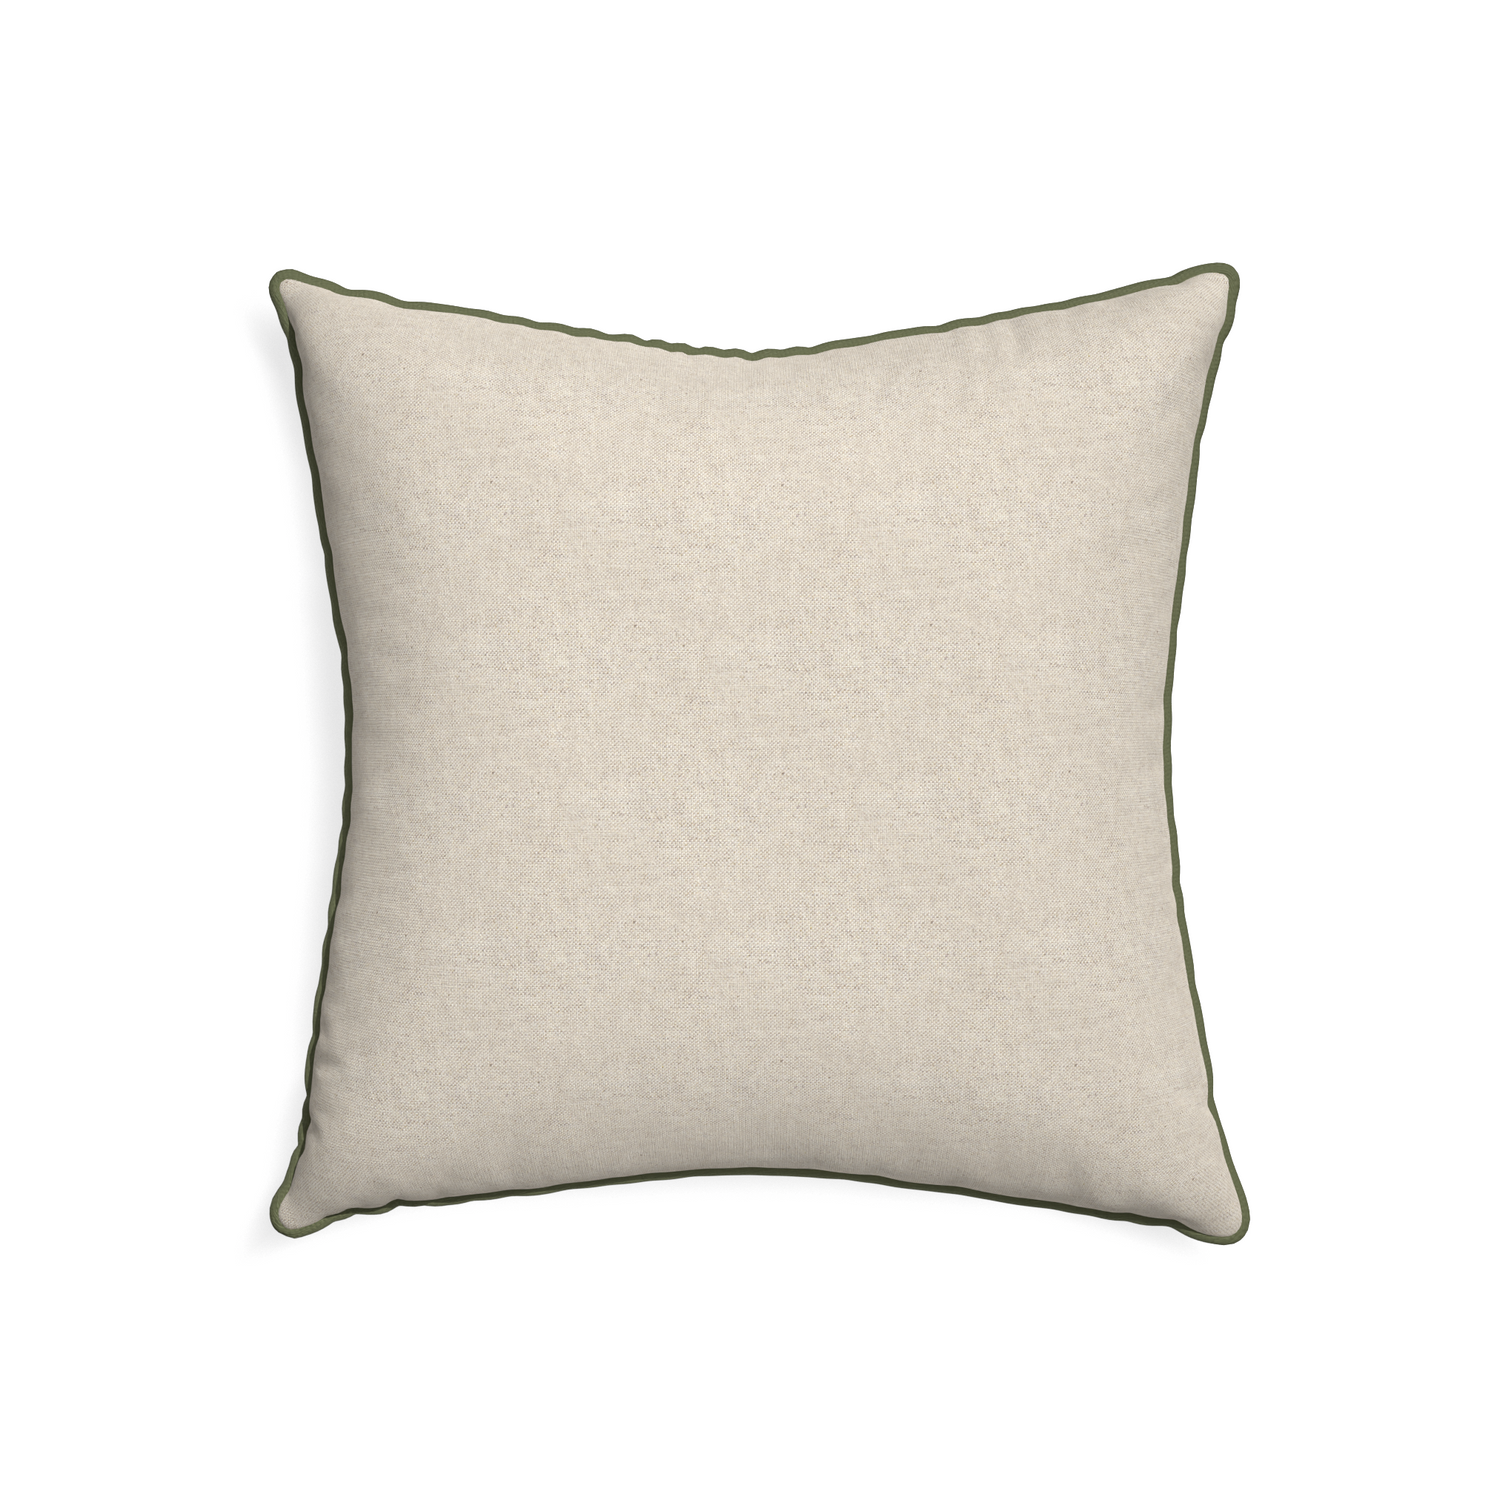 22-square oat custom pillow with f piping on white background